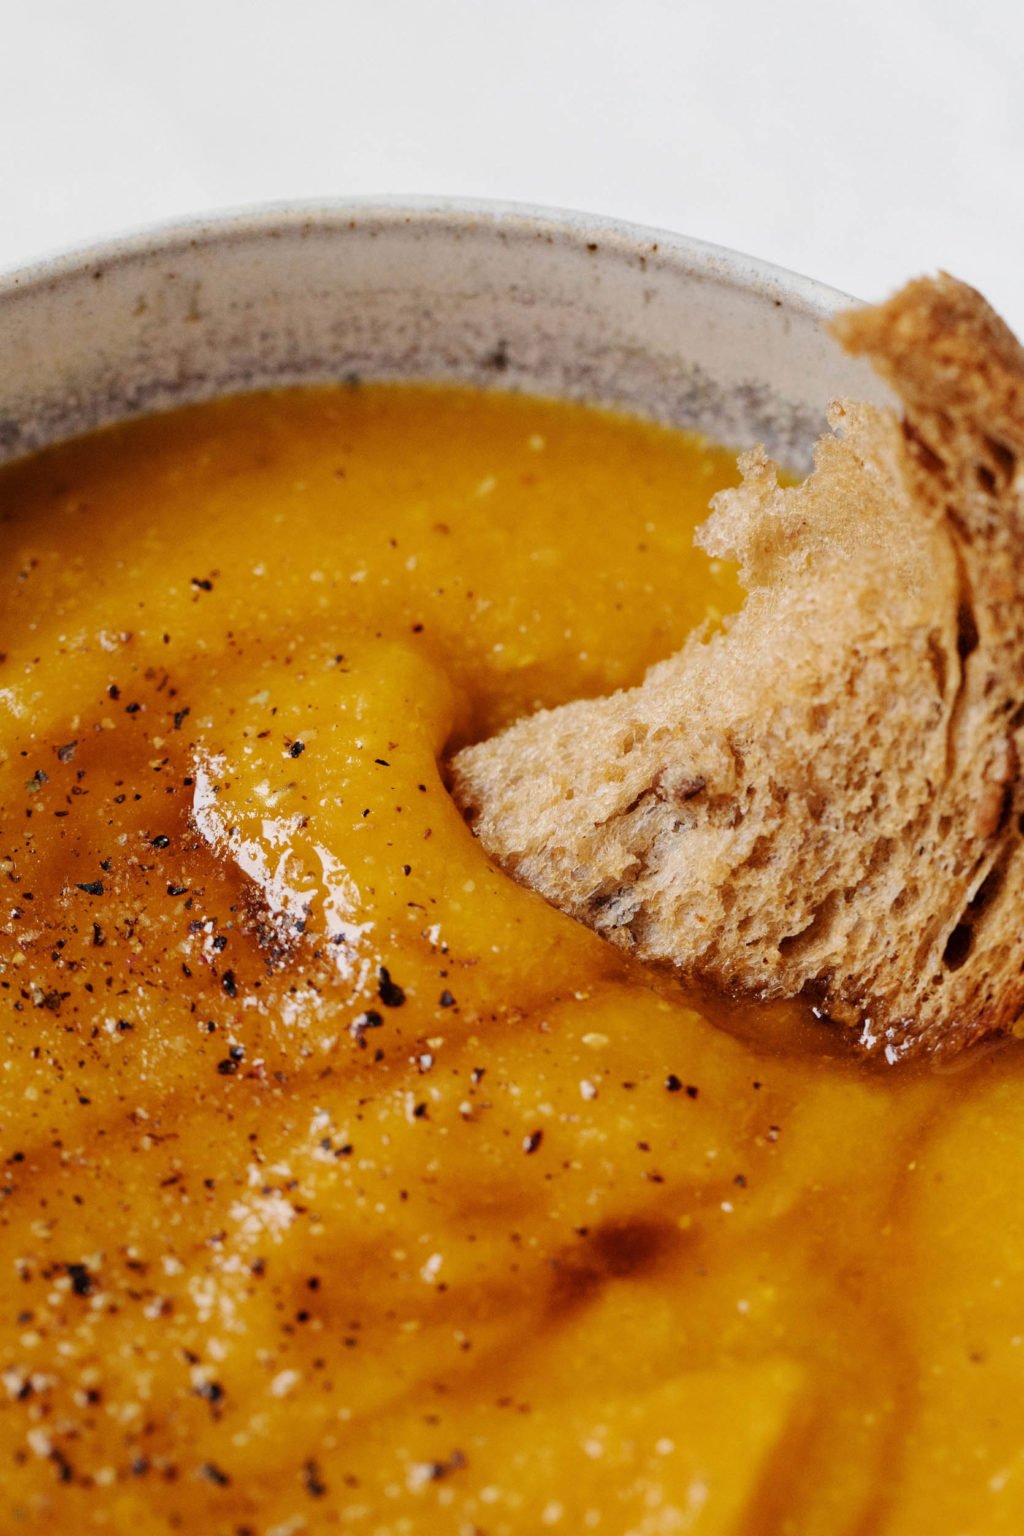 A slice of whole grain bread is dunked into a bowl of creamy, orange colored vegan soup.